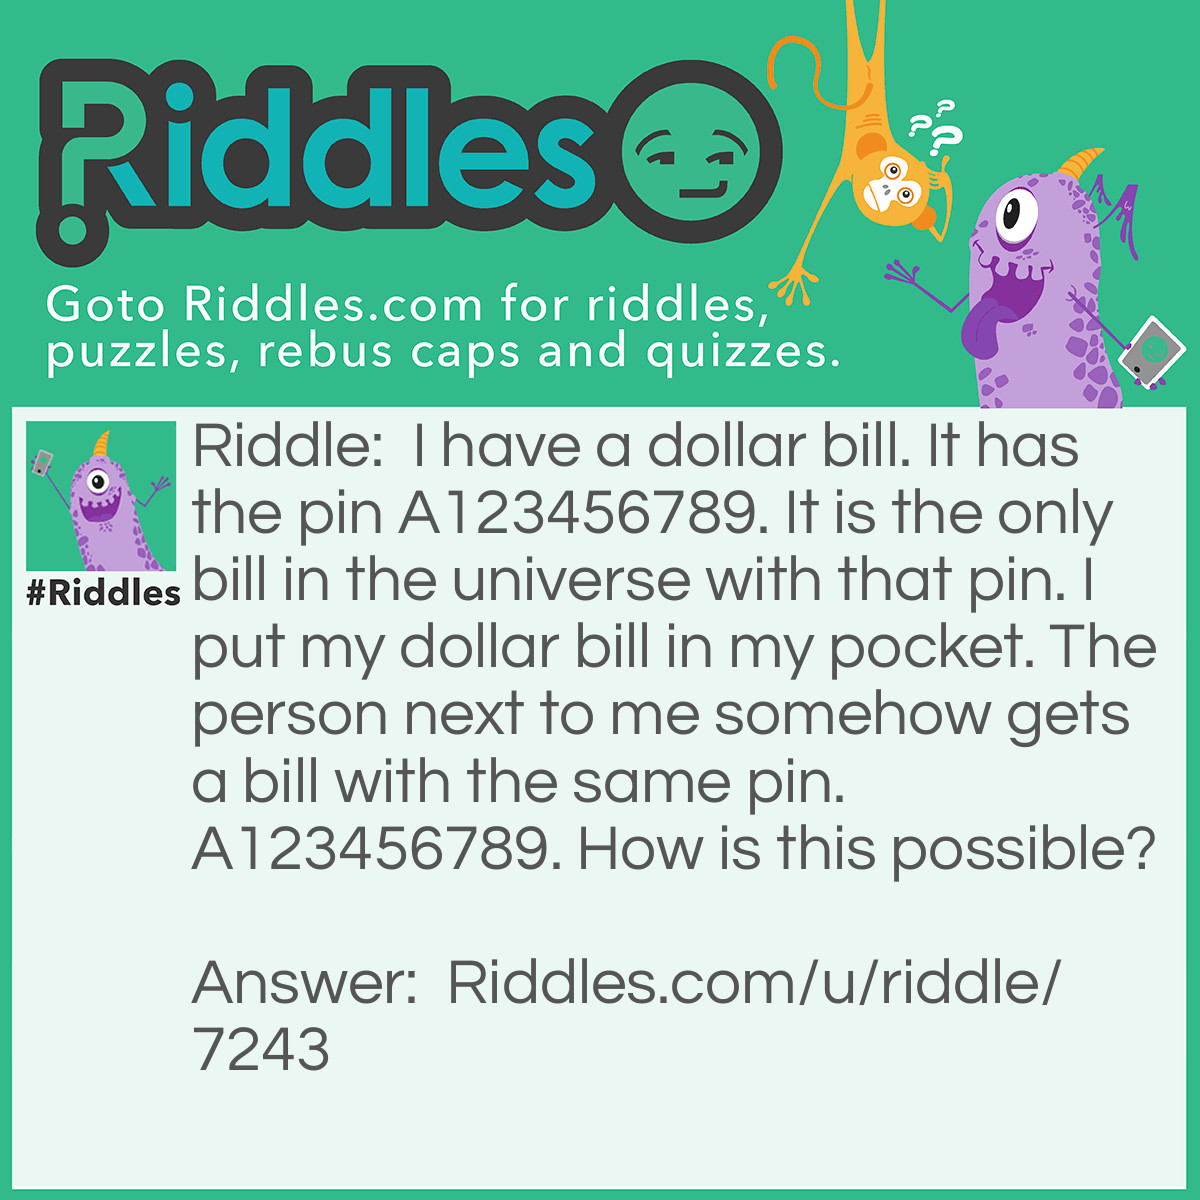 Riddle: I have a dollar bill. It has the pin A123456789. It is the only bill in the universe with that pin. I put my dollar bill in my pocket. The person next to me somehow gets a bill with the same pin. A123456789. How is this possible? Answer: The dollar bill is a different number Mine is a 10 his is a 1